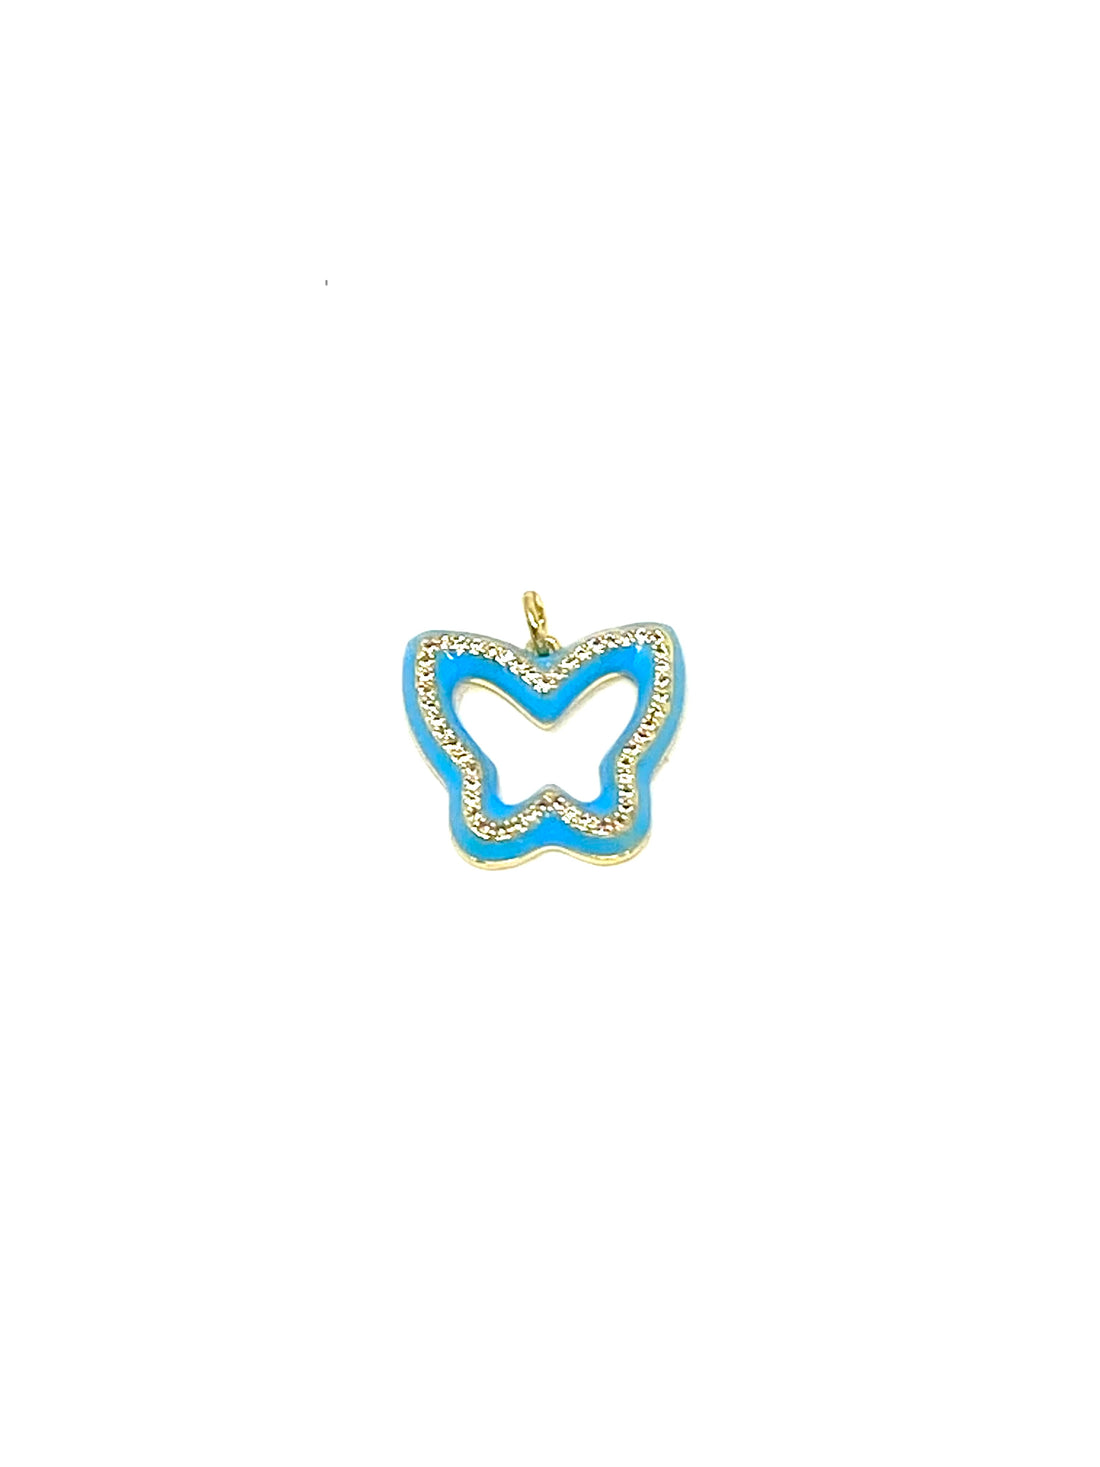 Charming Enamel Butterfly Charm with Gold Pave Outline